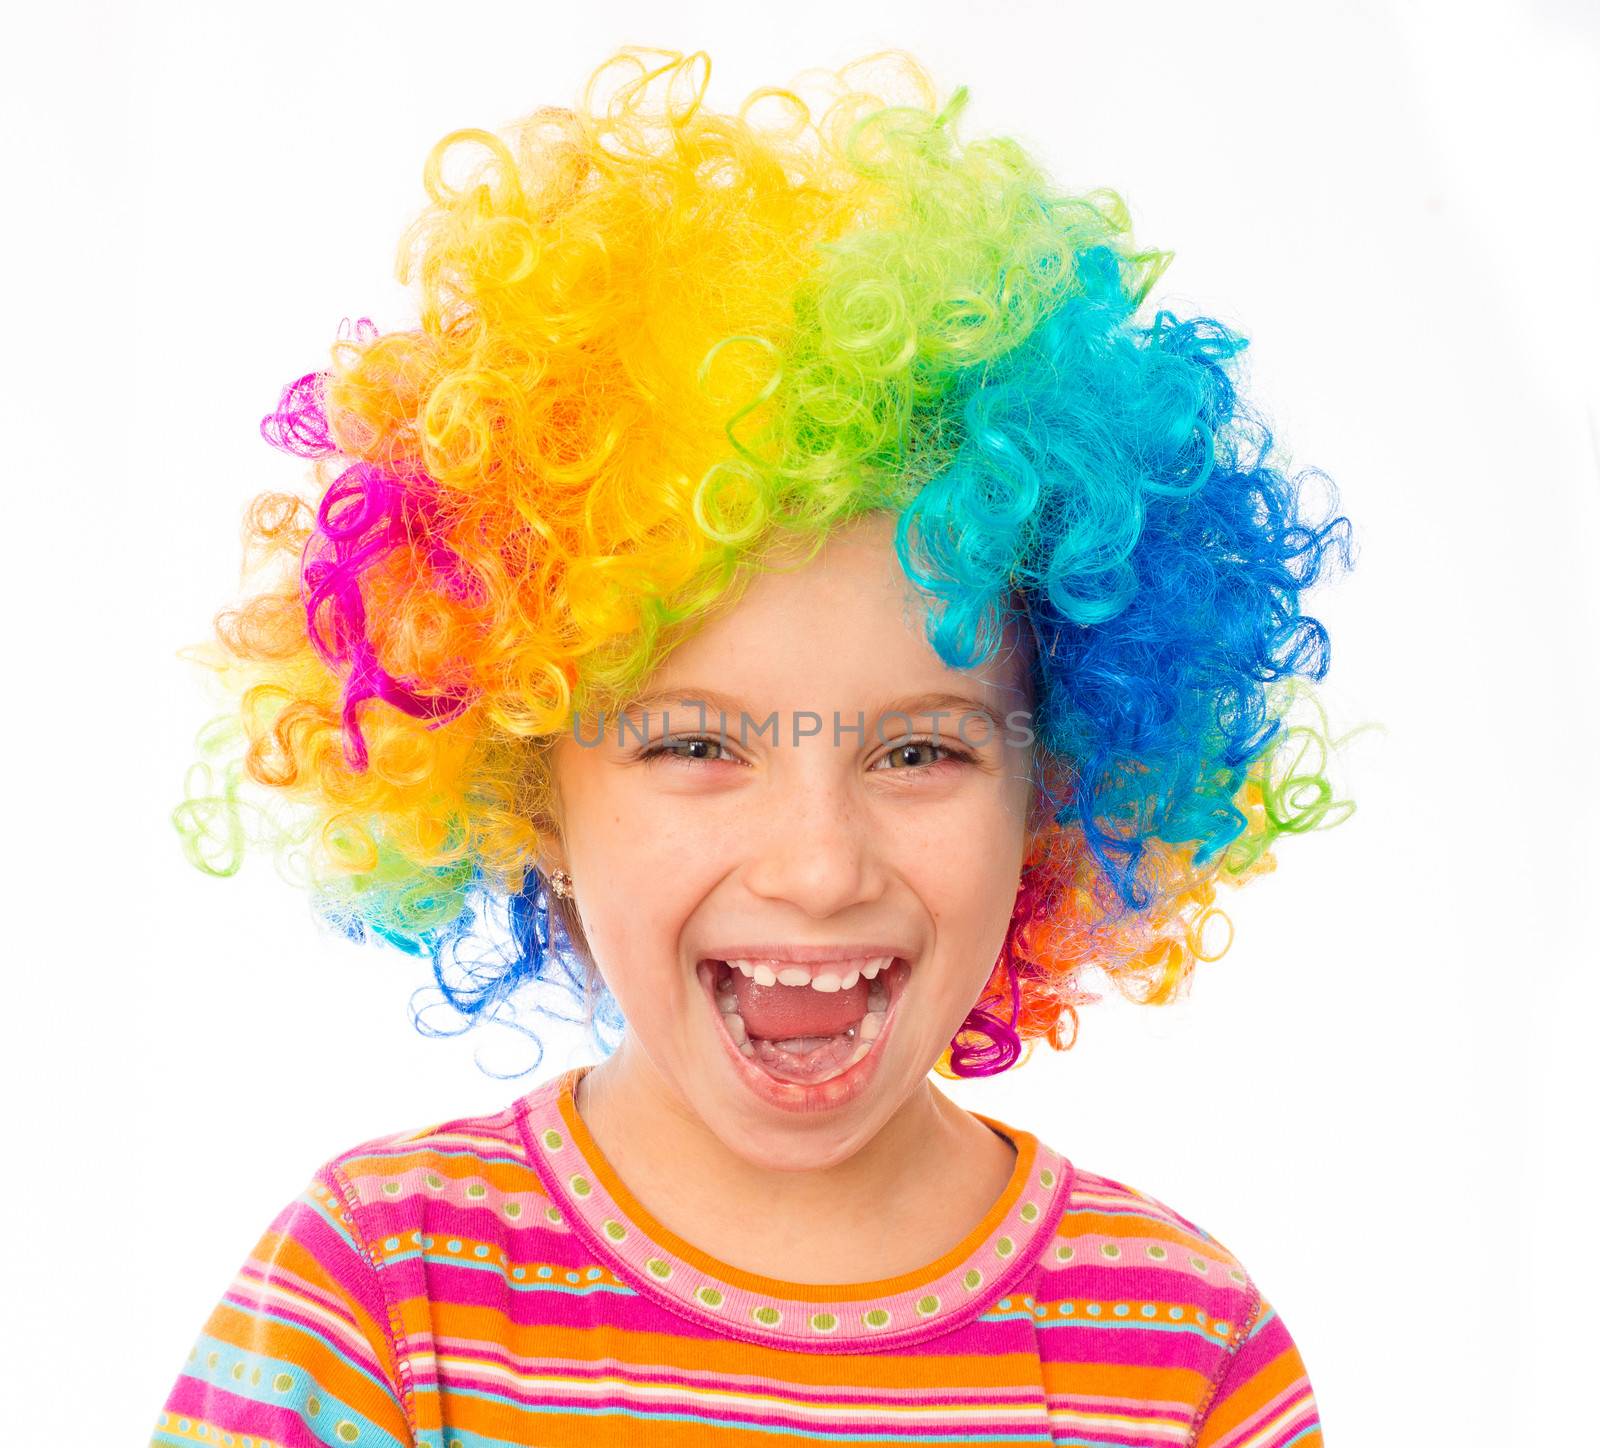 smiling little girl in clown wig isolated on white background